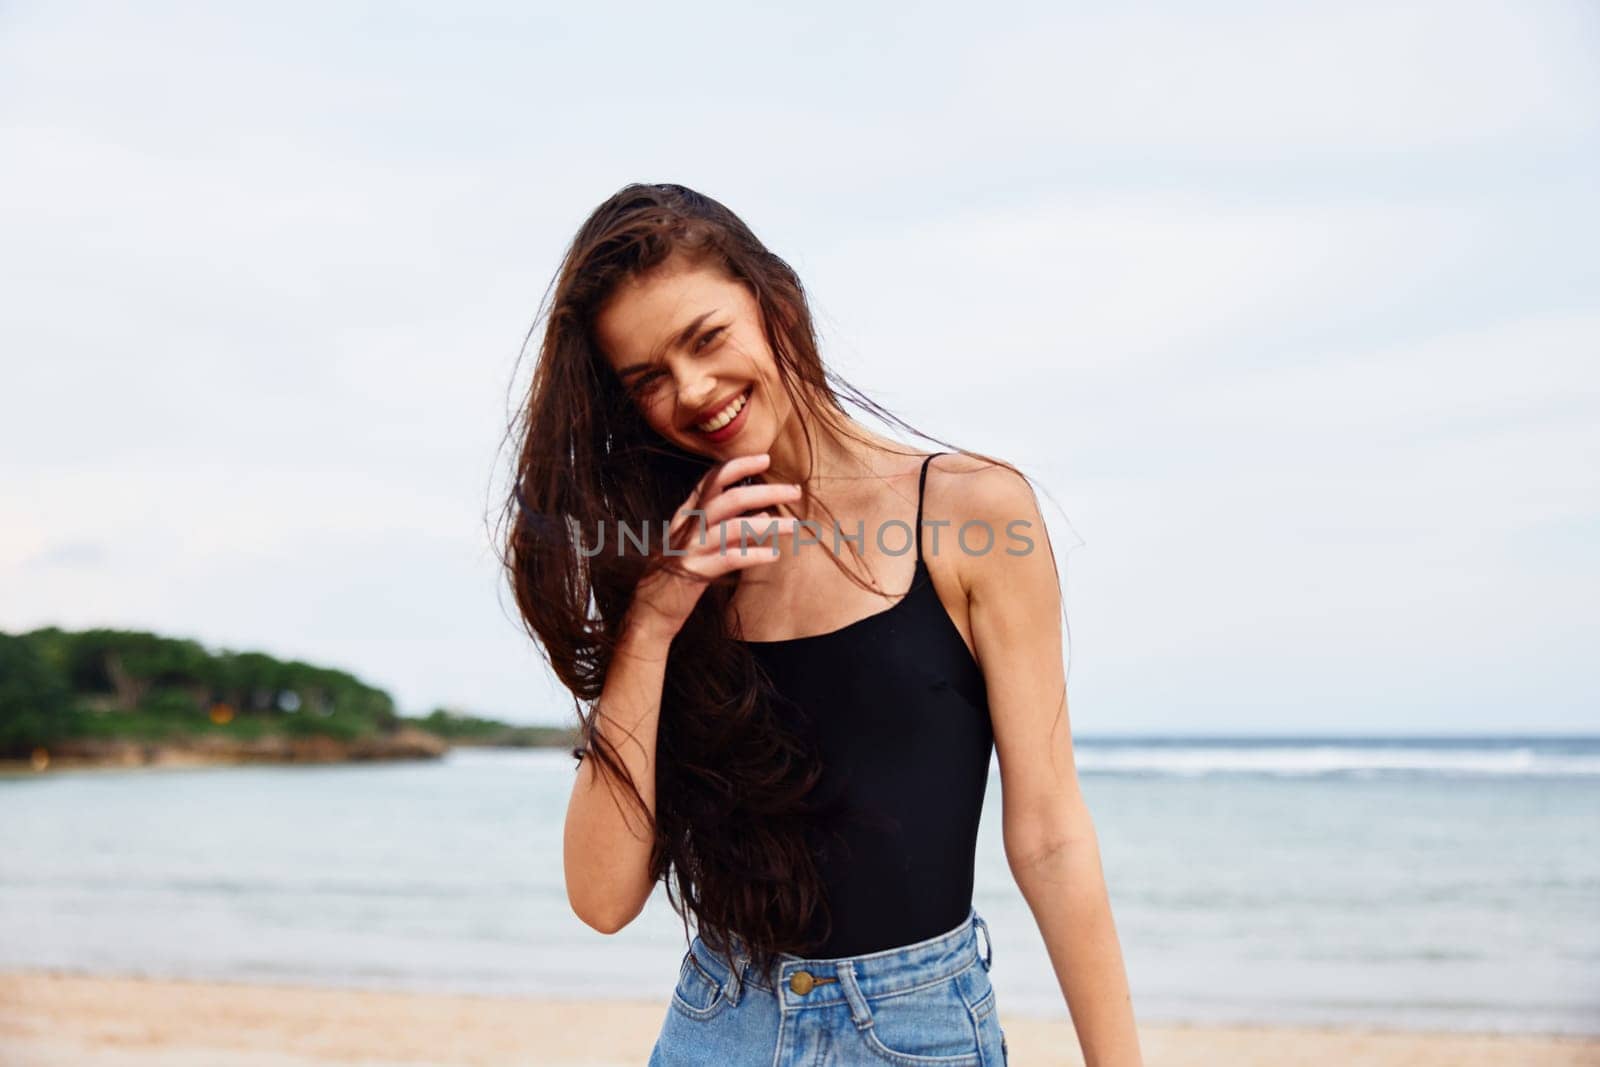 woman positive activity lifestyle shore active sand water walking young running summer sunset sea carefree tan beach travel smile vacation girl